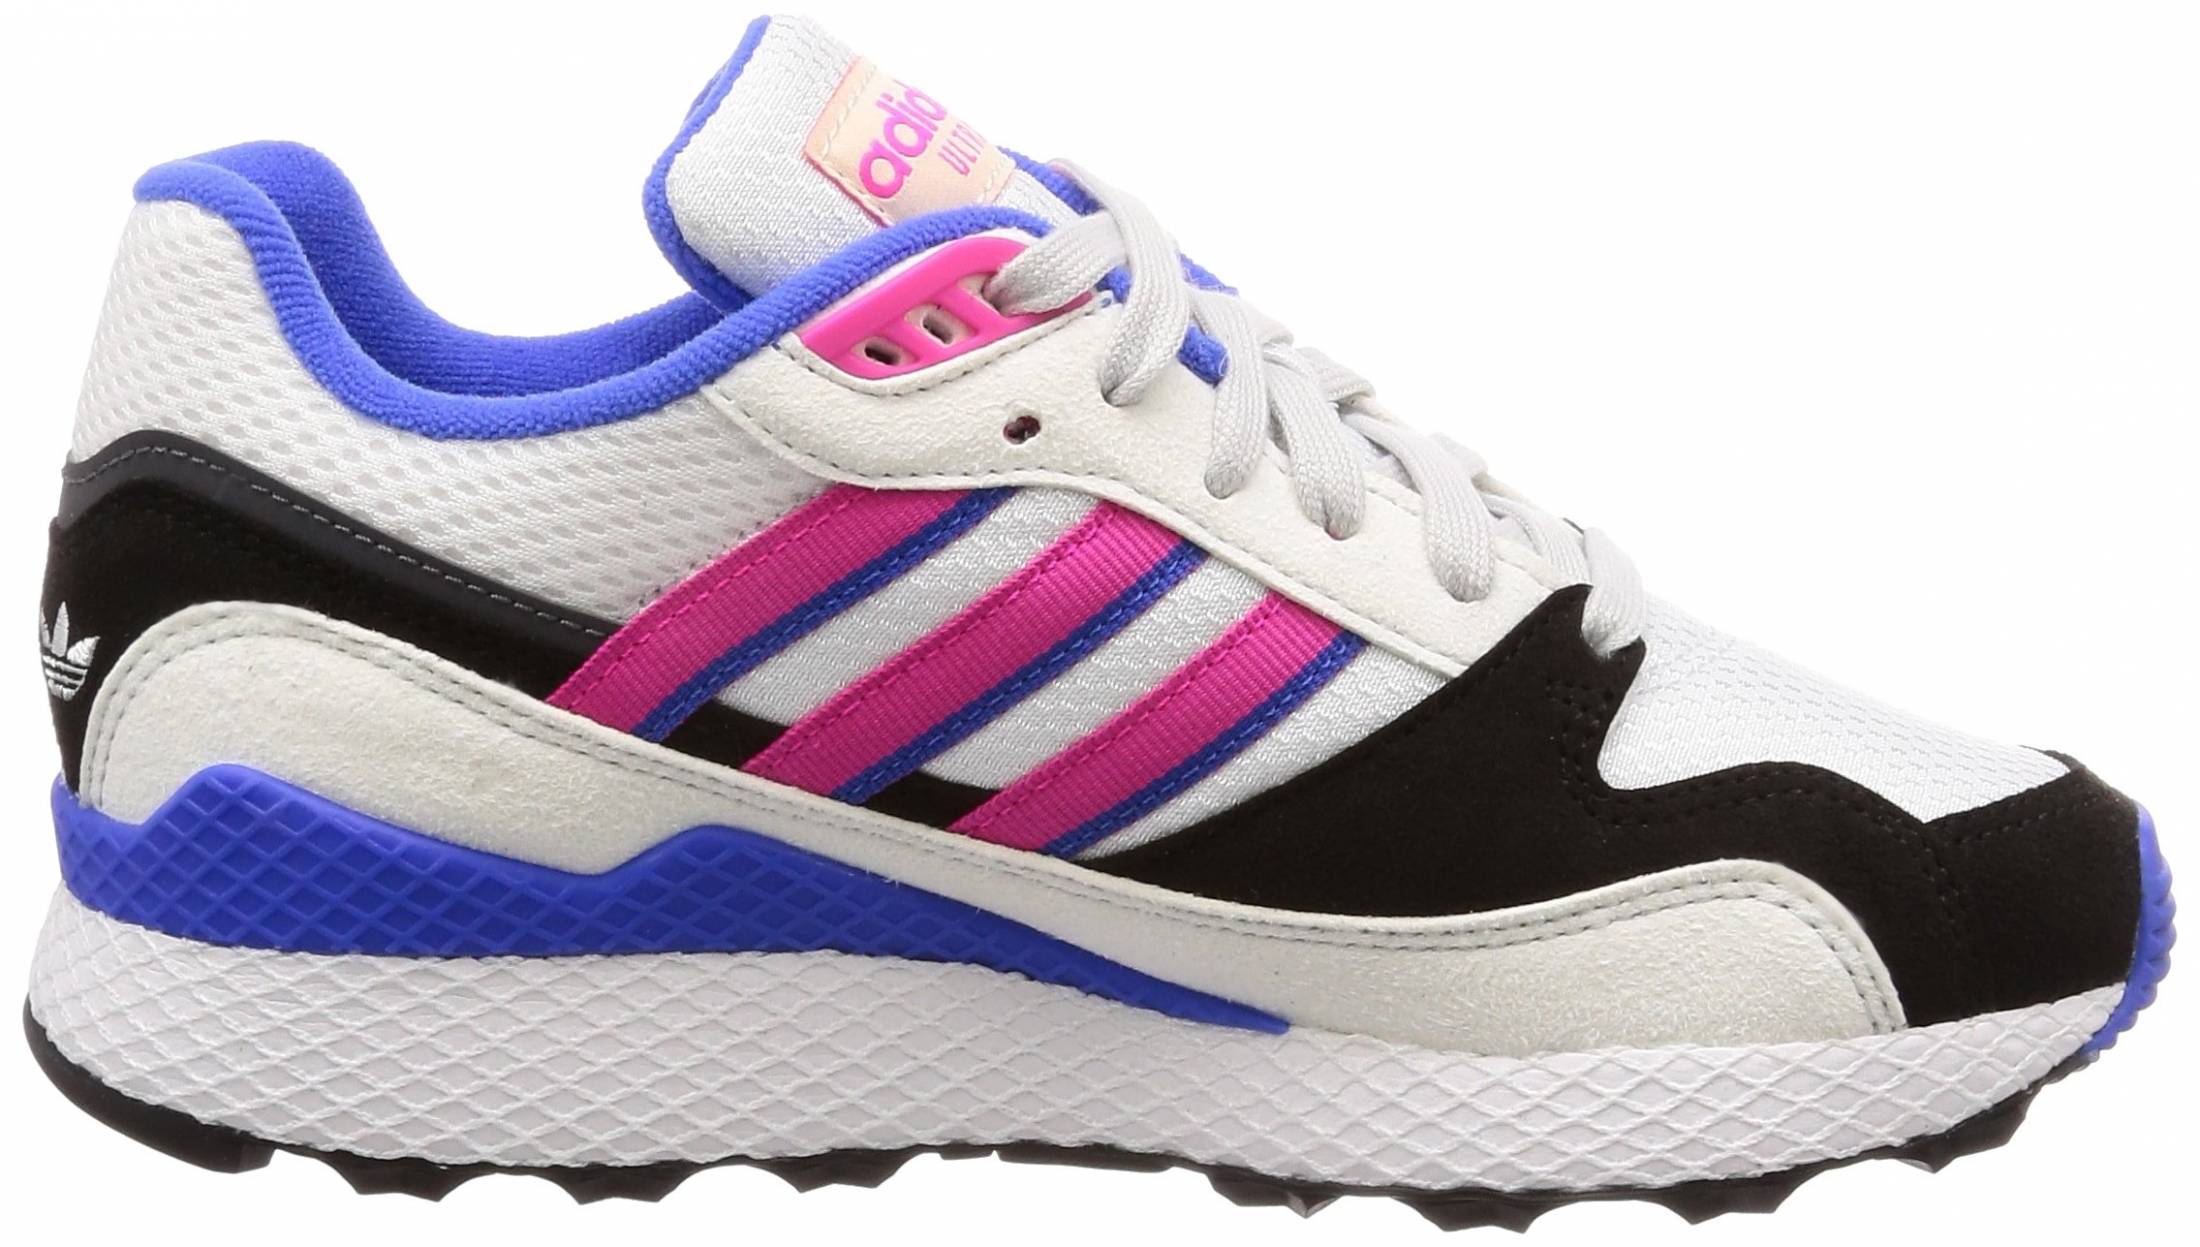 Bangladesh Produktivitet Fearless Adidas Ultra Tech sneakers in 7 colors (only $60) | RunRepeat